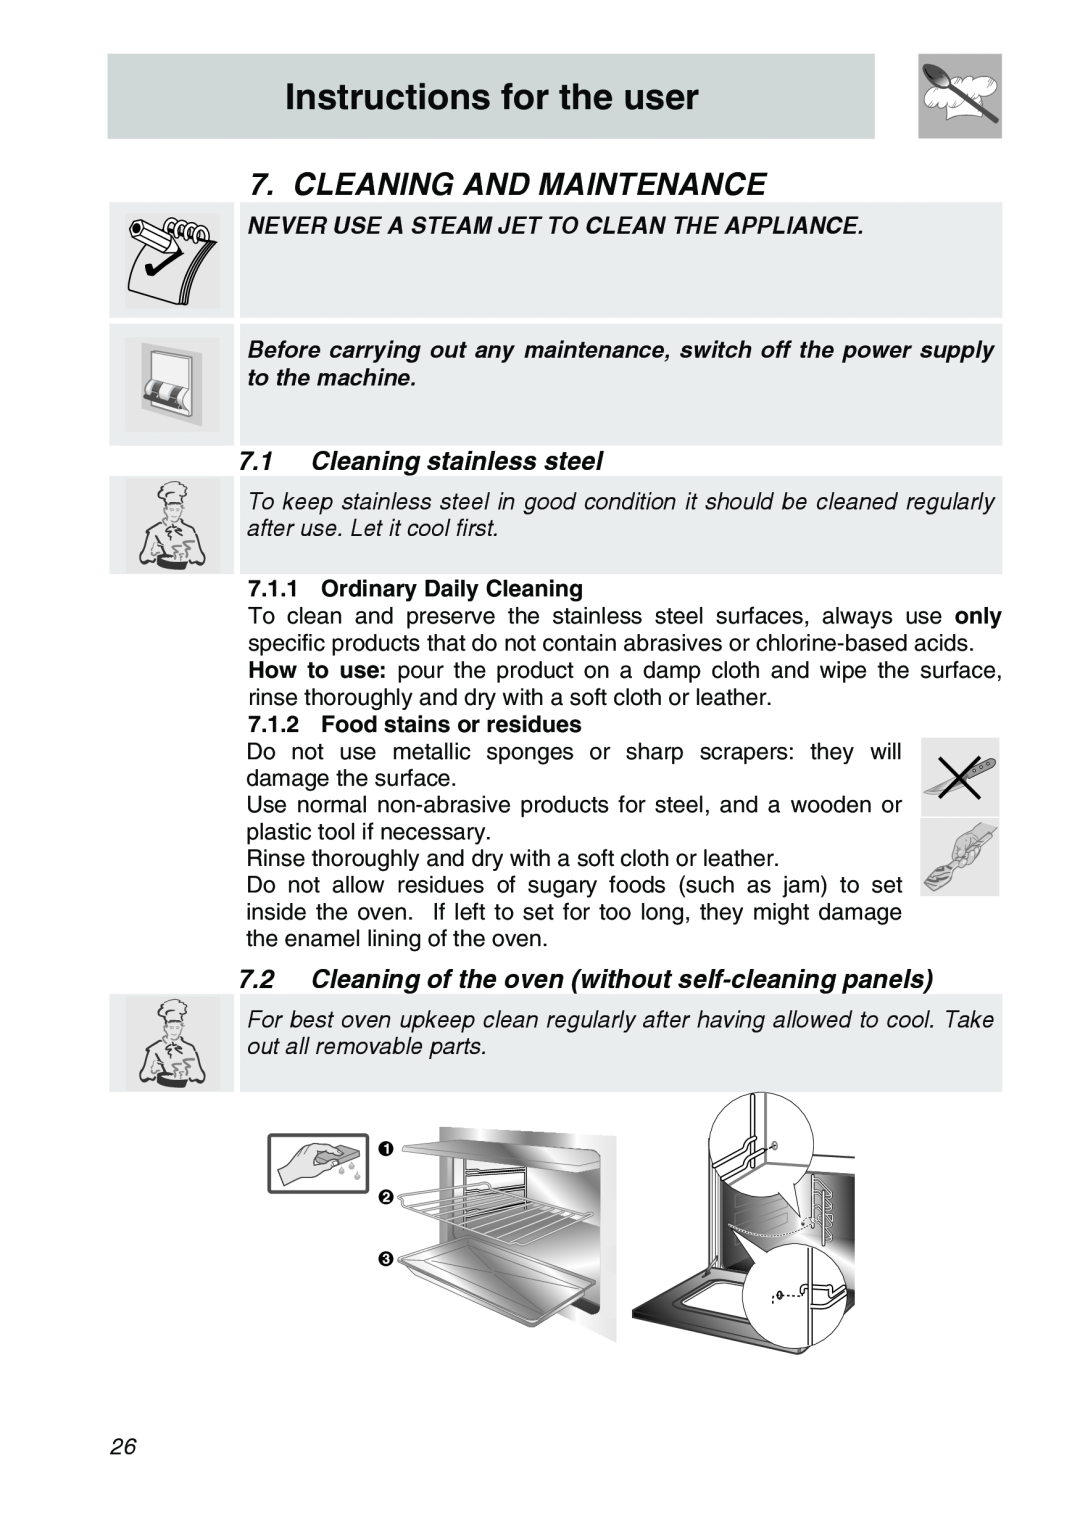 Smeg SCA306X Cleaning And Maintenance, 7.1Cleaning stainless steel, Instructions for the user, Ordinary Daily Cleaning 